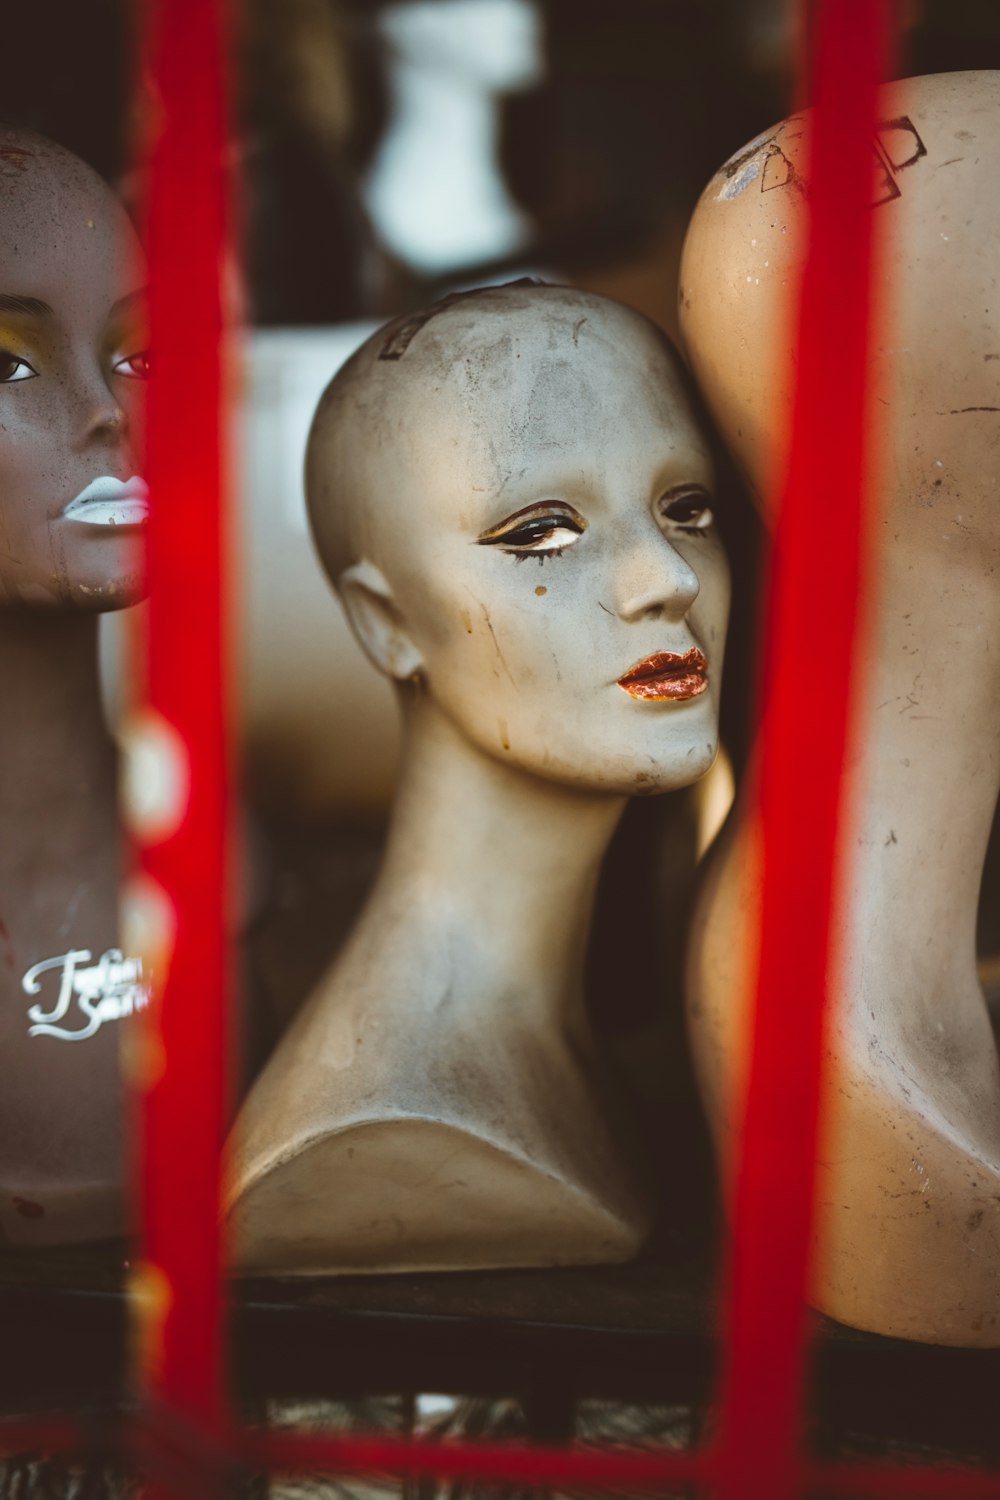 mannequin on brown surface